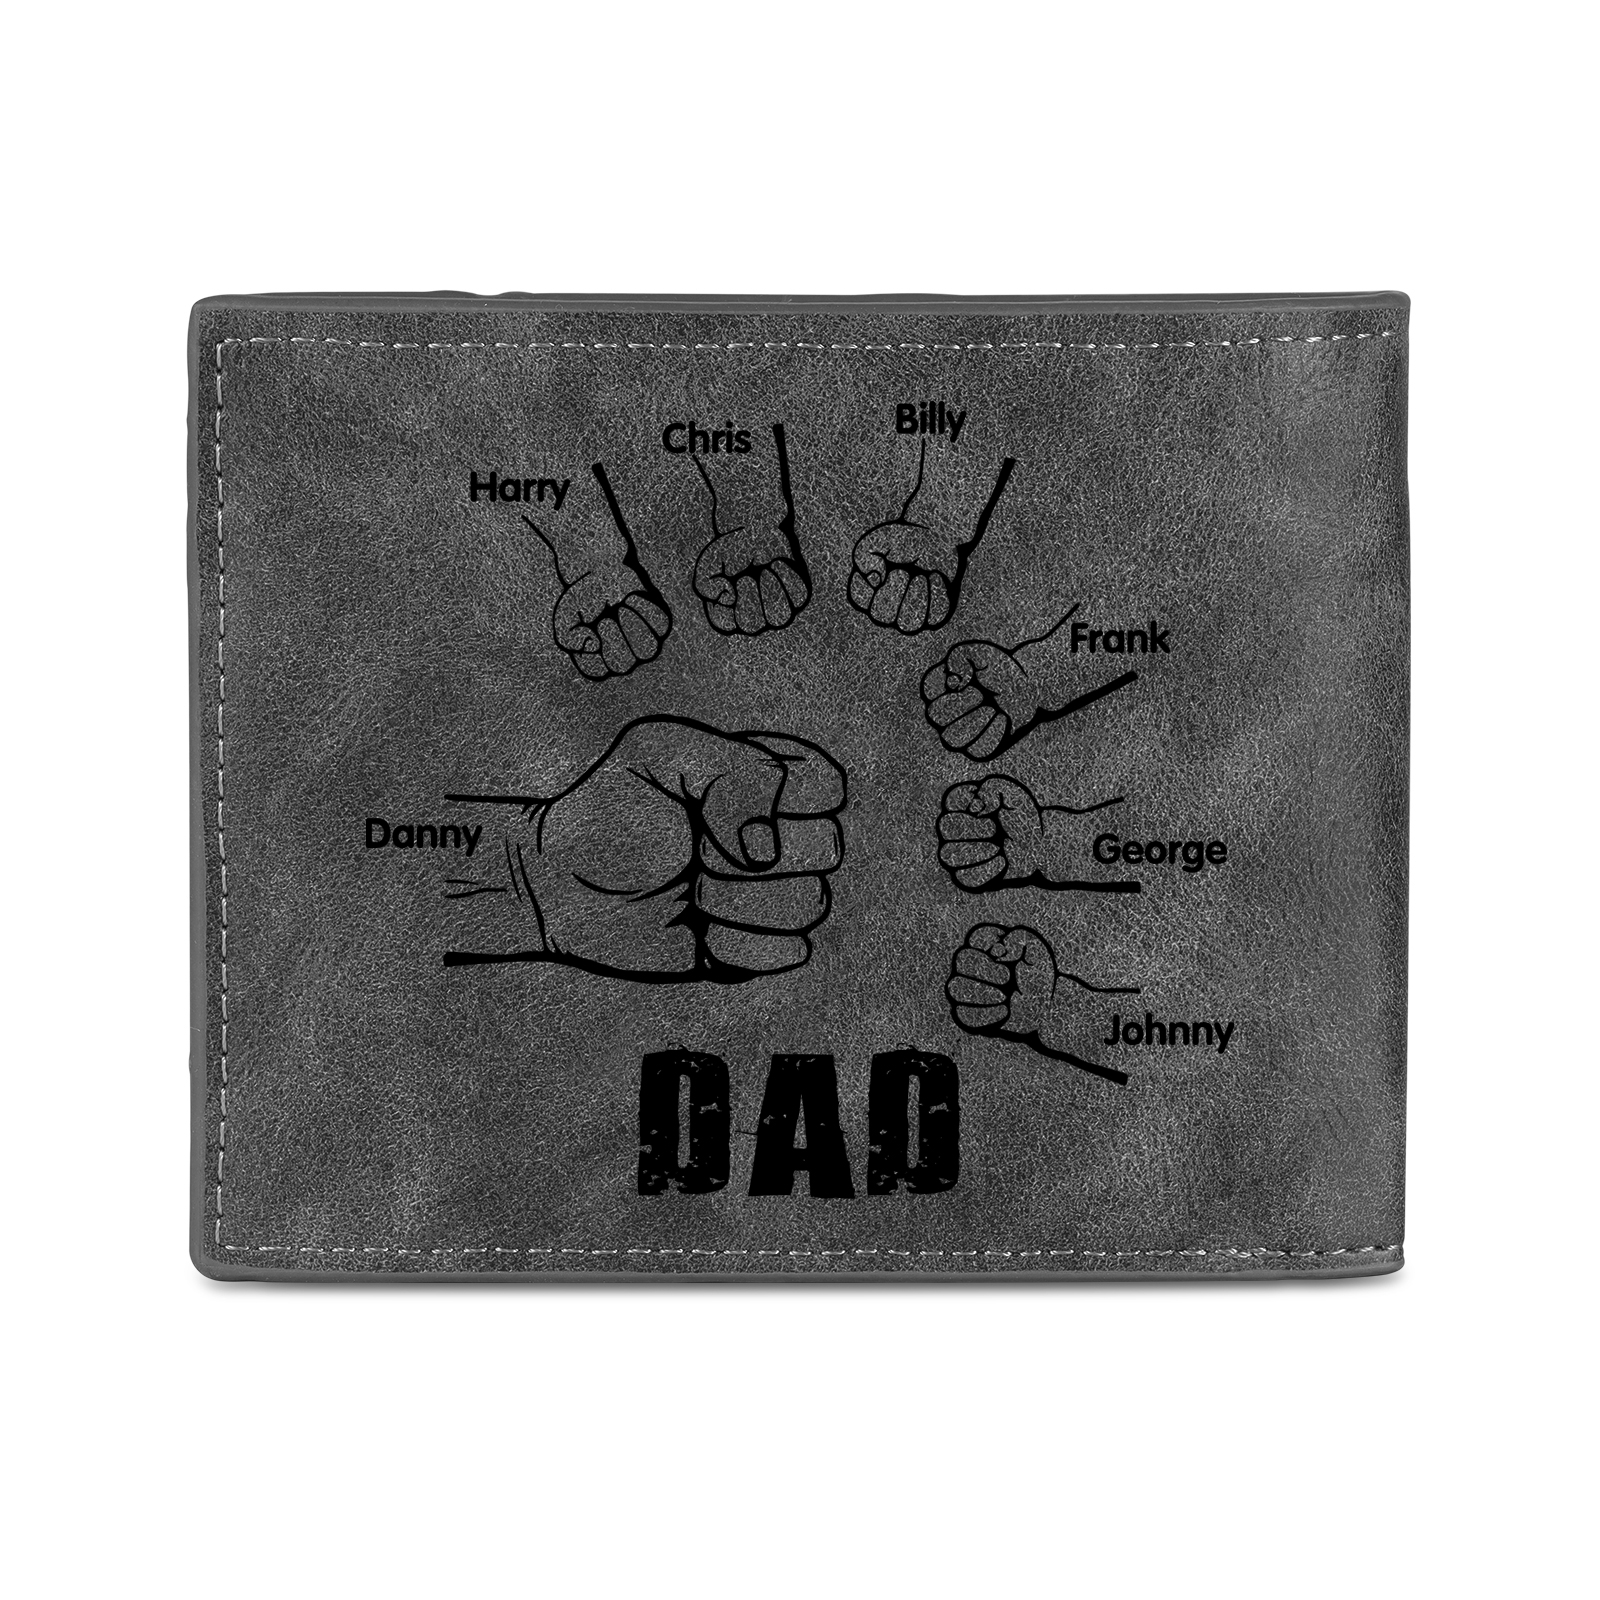 7 Names - Personalized Photo Custom Leather Men's Wallet as a Father's Day Gift for Dad